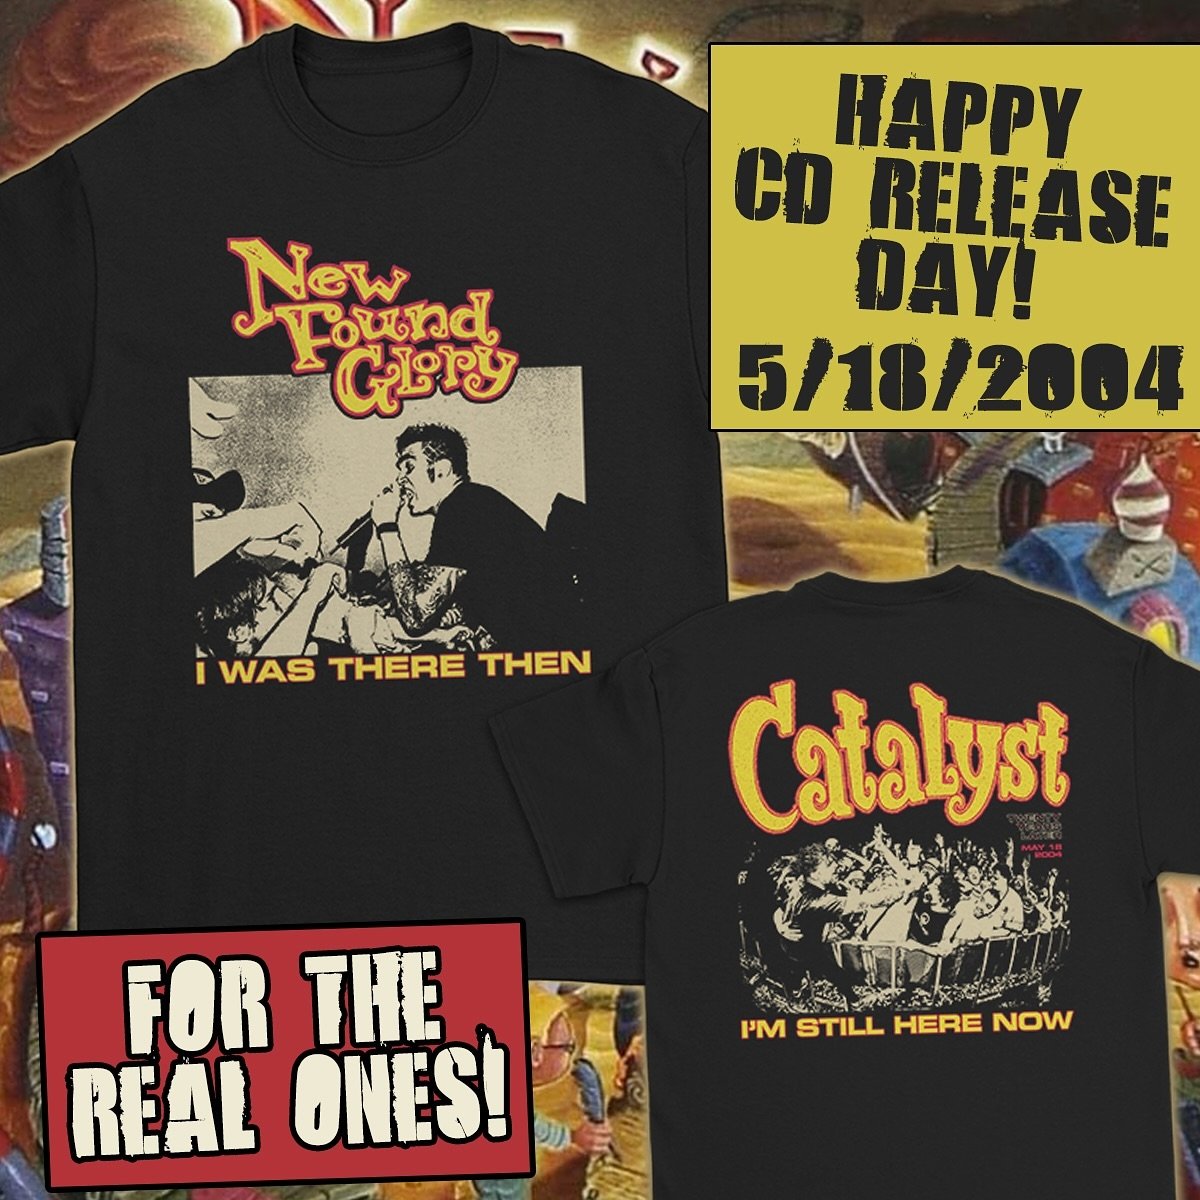 The history and stories our fans have with our music have always been the pulse of our band. So many of you were there at the &ldquo;CD&rdquo; stores that day, May 18th, when Catalyst was first released, and you&rsquo;re still in the crowds at our sh